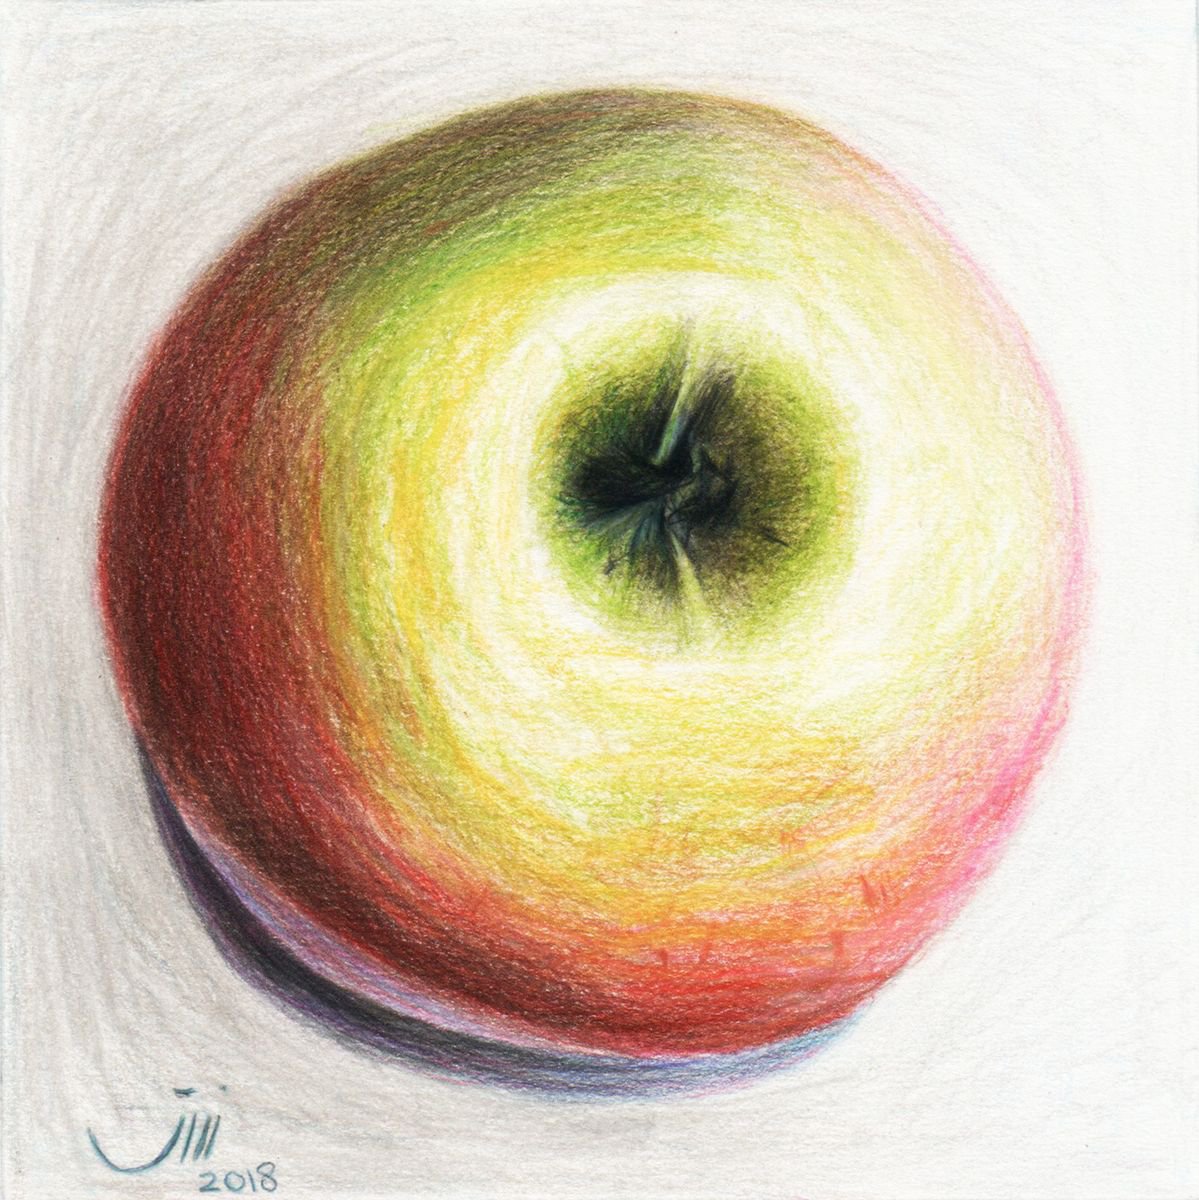 No.111, An Apple by sedigheh zoghi